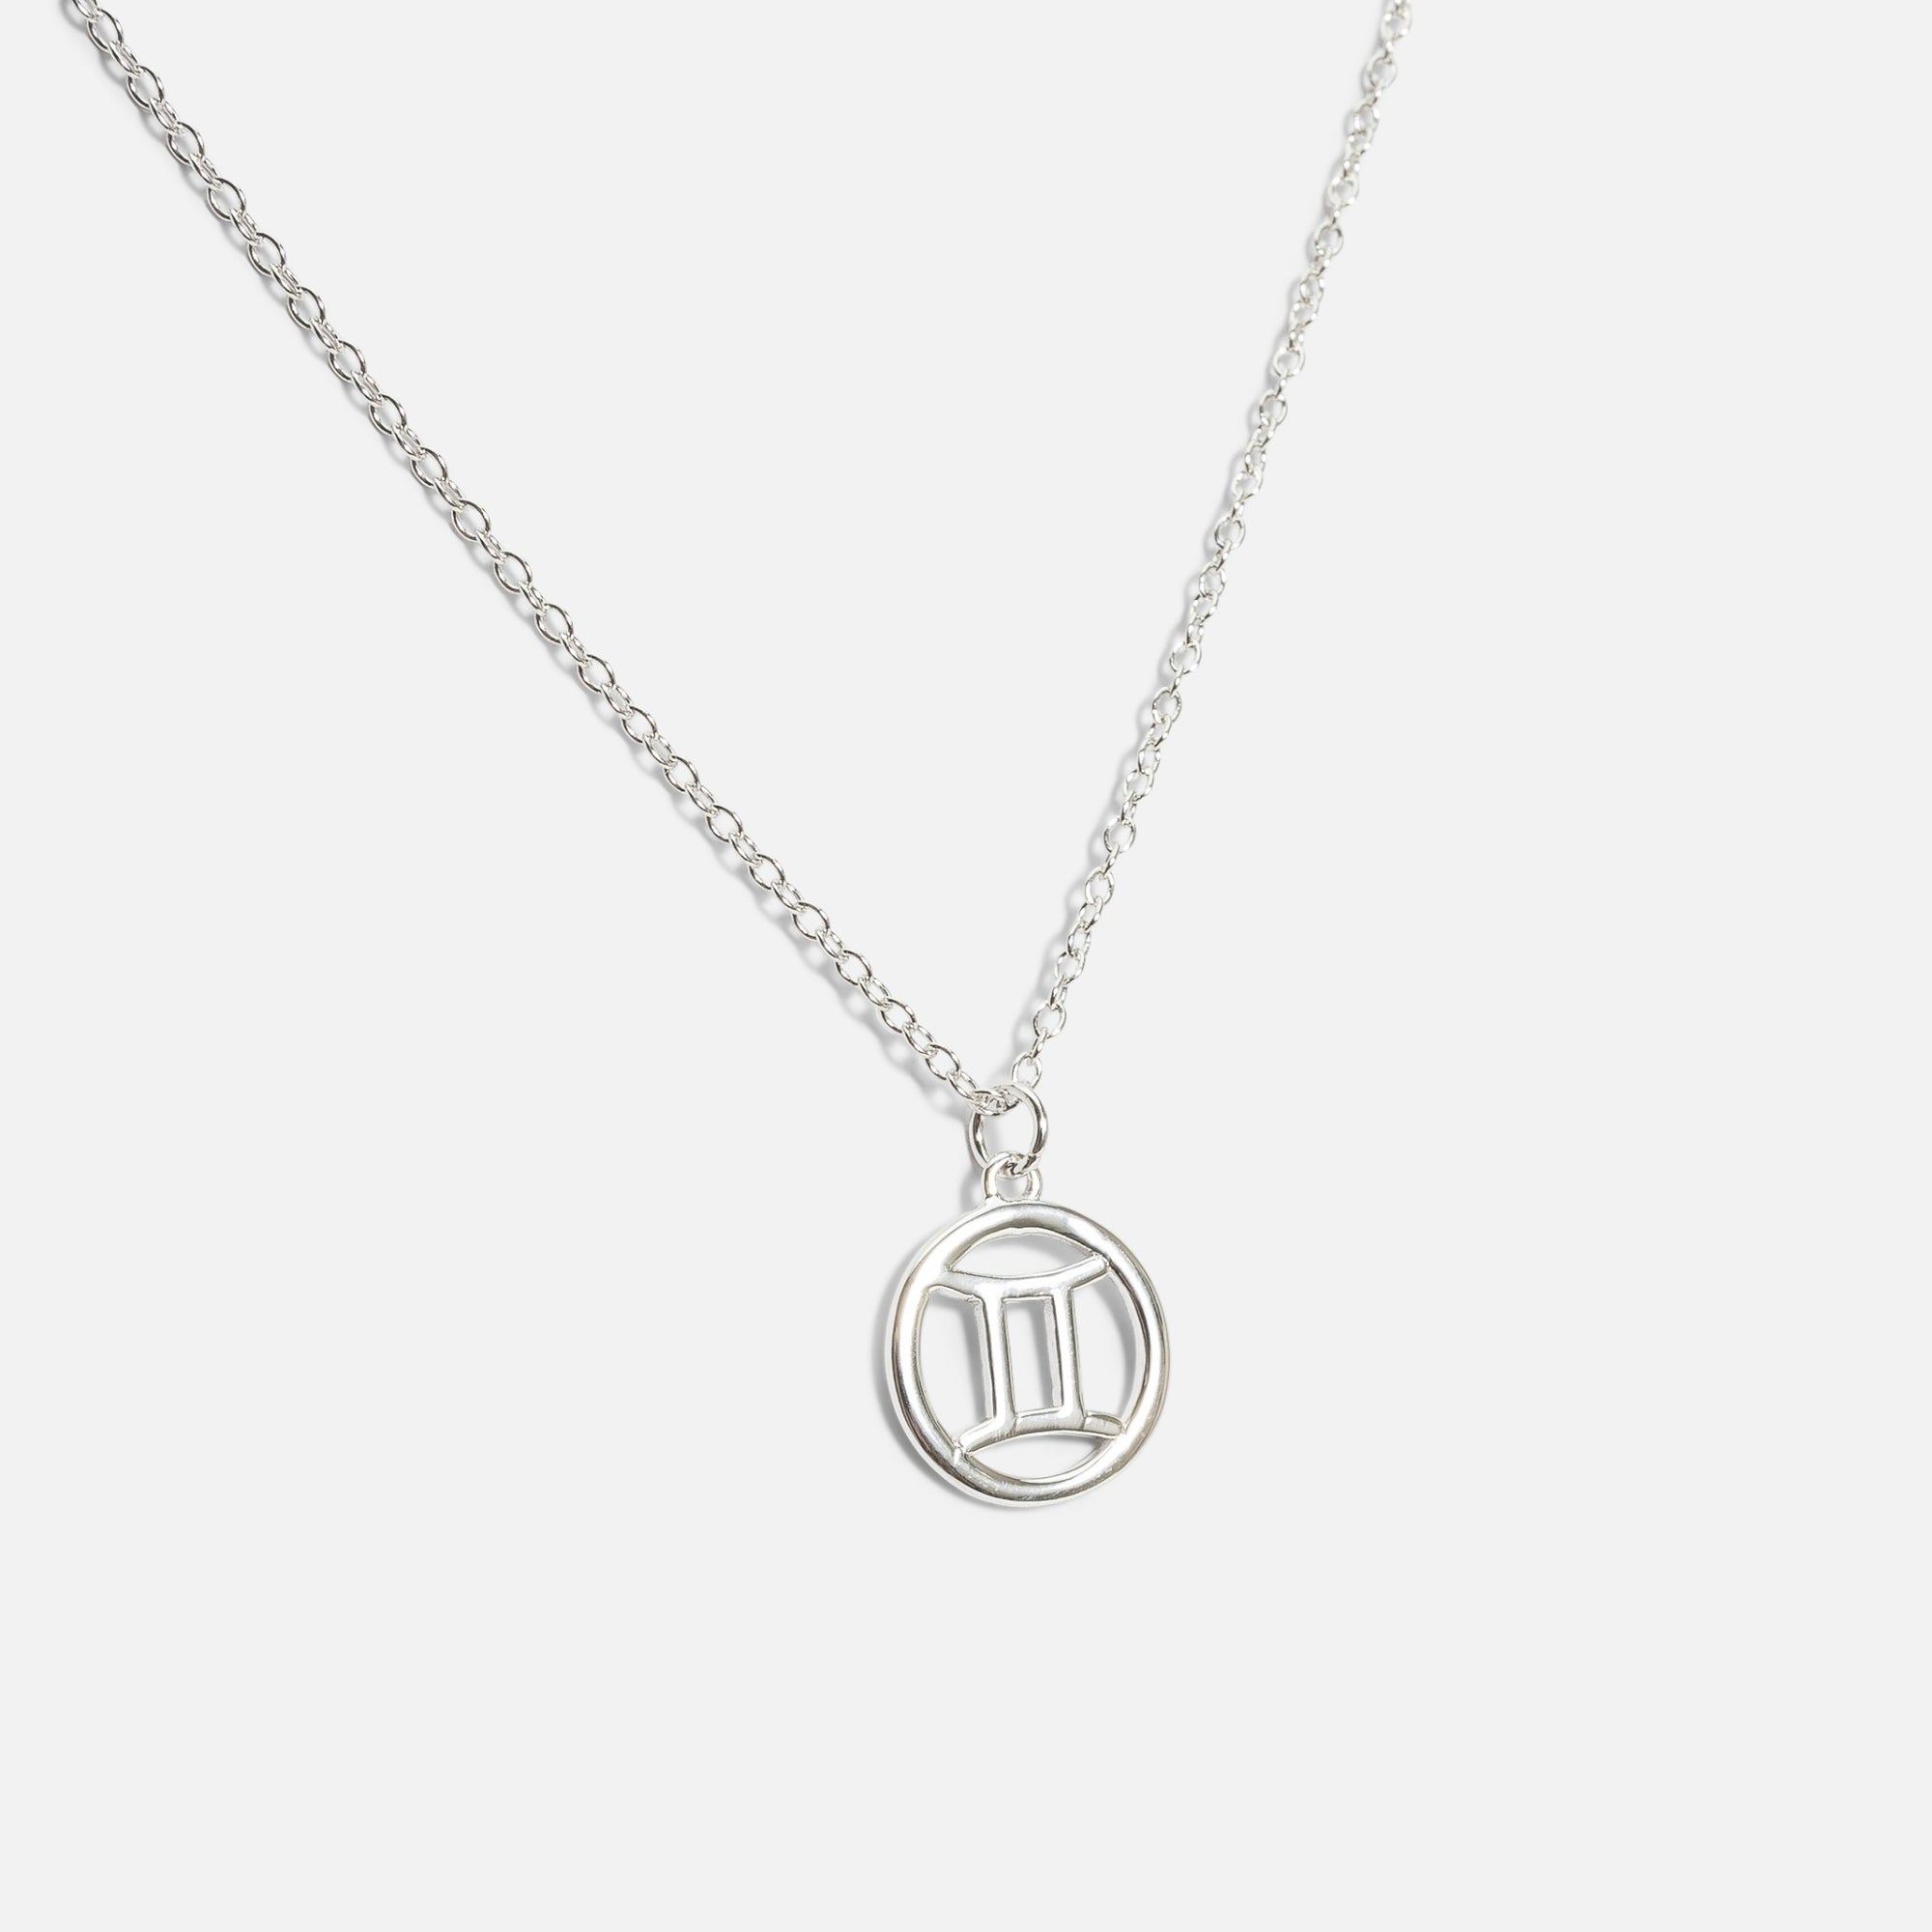 Sterling silver pendant with gemini zodiac sign